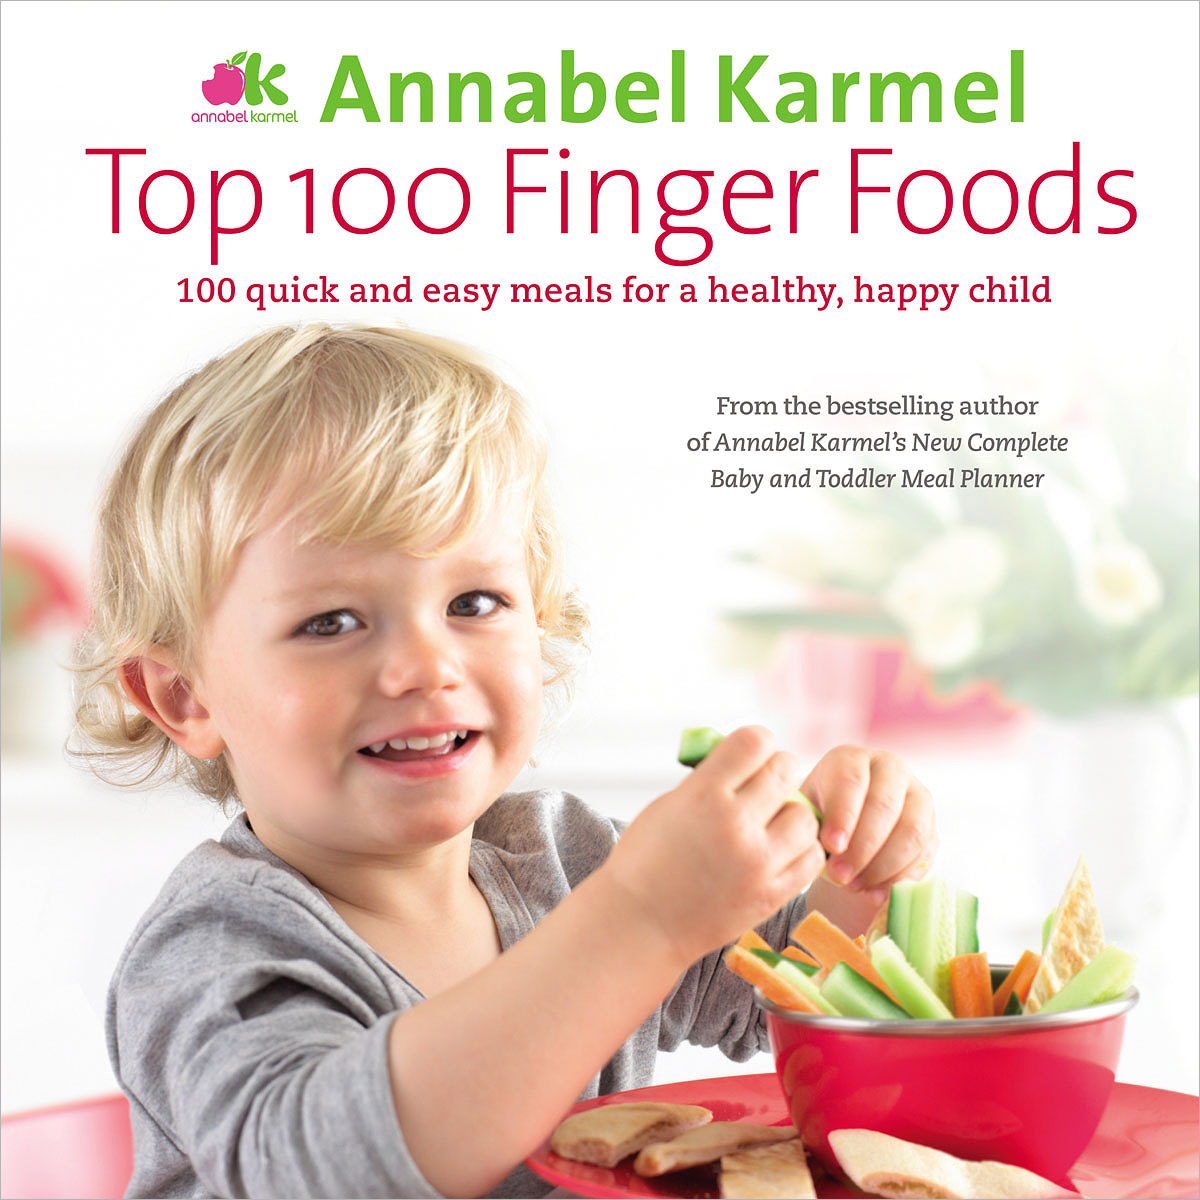 Top 100 Finger Foods: 100 Quick and Easy Meals for a Healthy, Happy Child